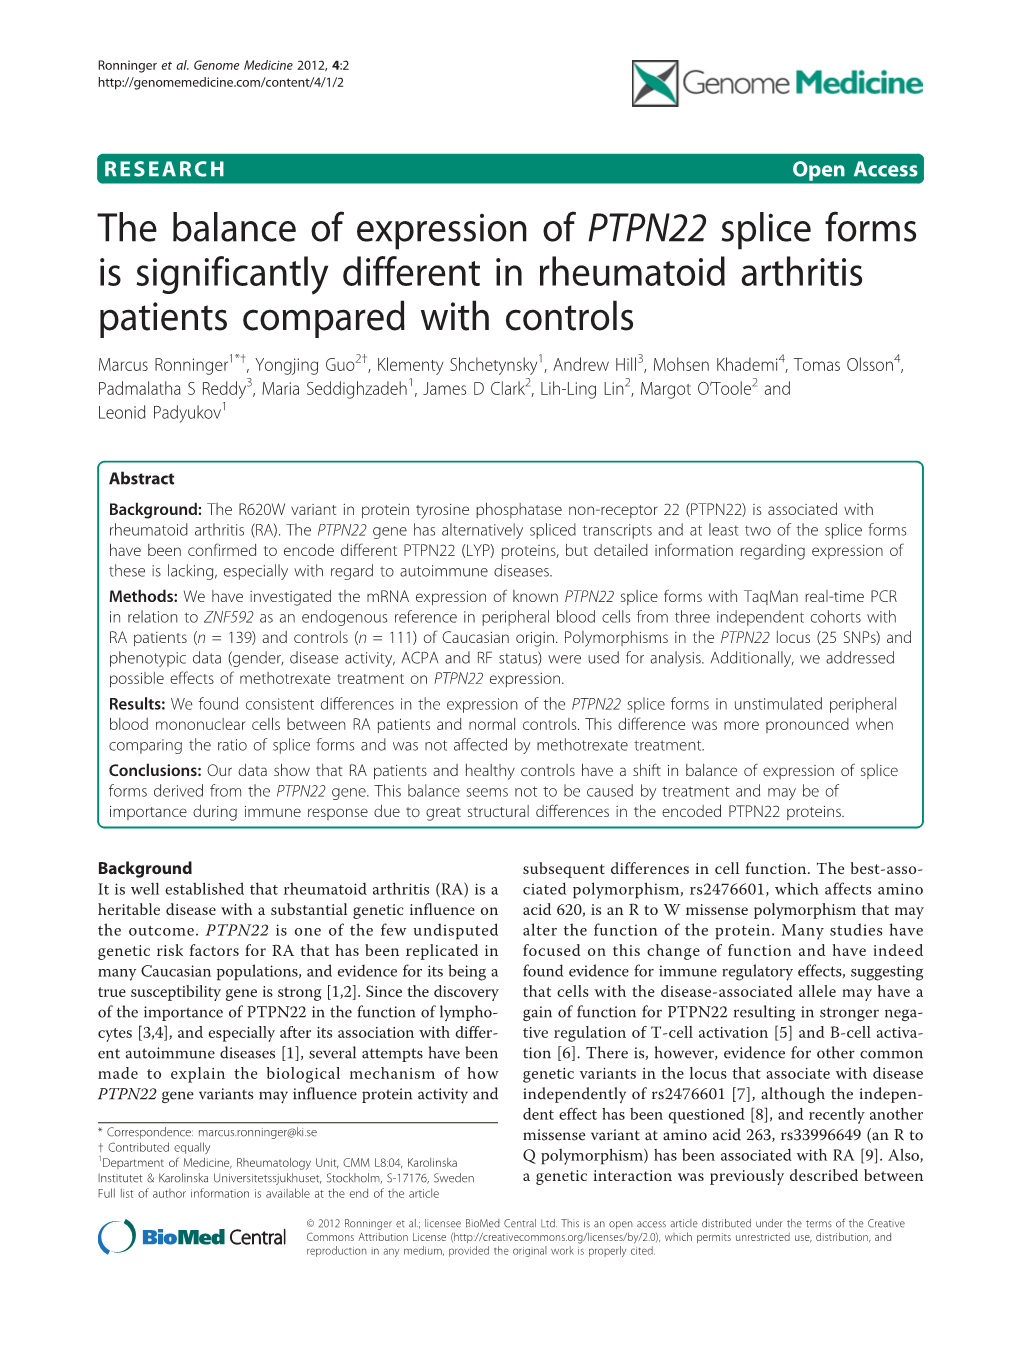 The Balance of Expression of PTPN22 Splice Forms Is Significantly Different